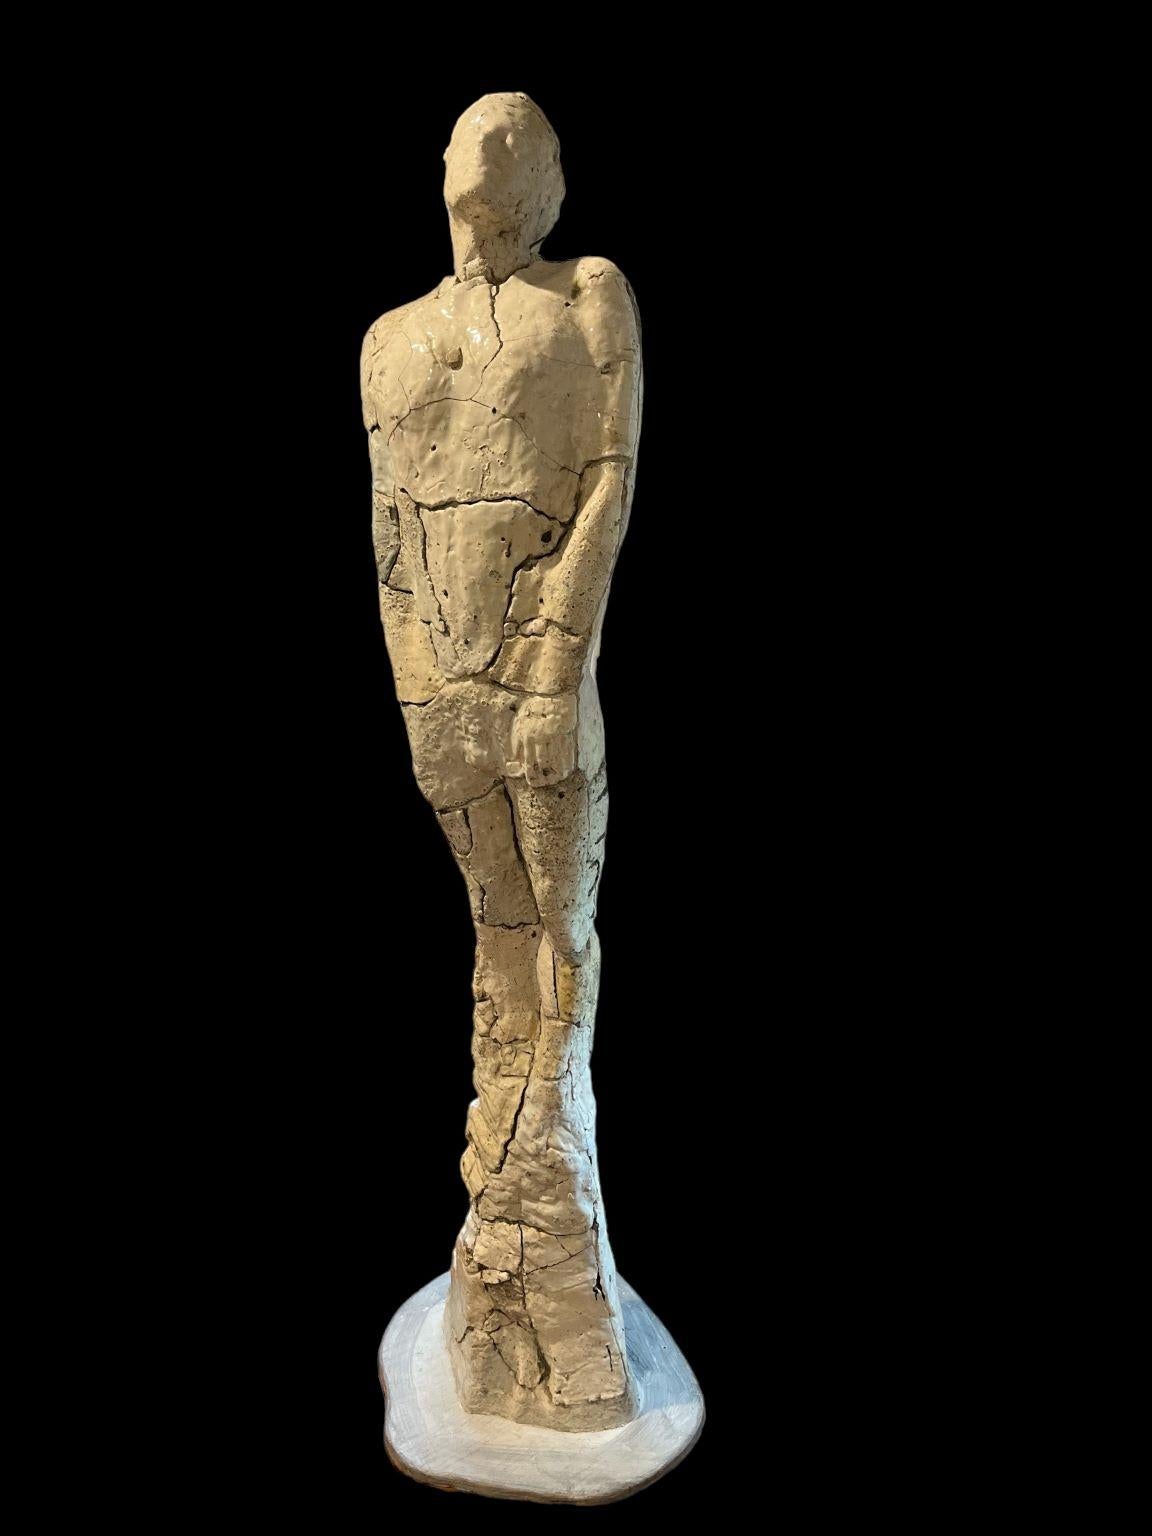 Stellar modernist Mid Century ceramic life-size sculpture of a man entitled “The Restoration of Hope” By Artist (B.1948)Dan Snyder . Commissioned in 1982 for the Lannan Foundation. A similar piece “The Restoration Of Hope 2” was commissioned for